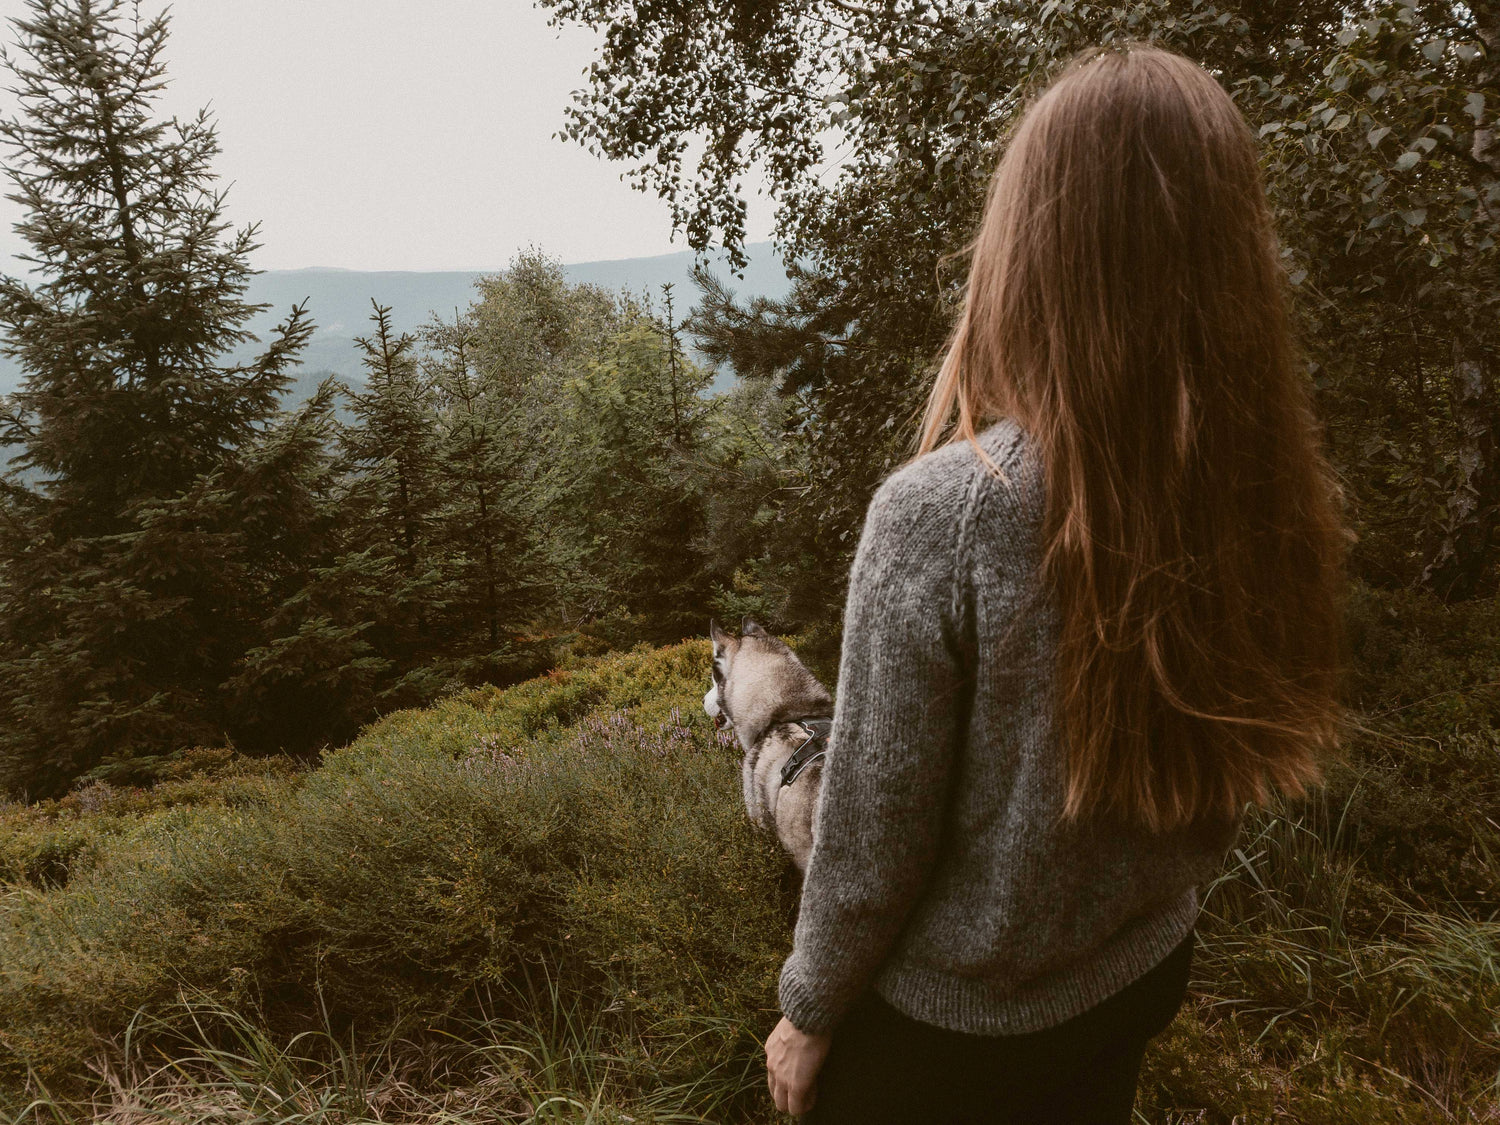 Designer Ulven in a grey Wullpullover sweater handknit in Pommernglück from Calling Sheep, standing on a mountain slope overlooking a vast scenery, with her husky-malamute dog next to her.